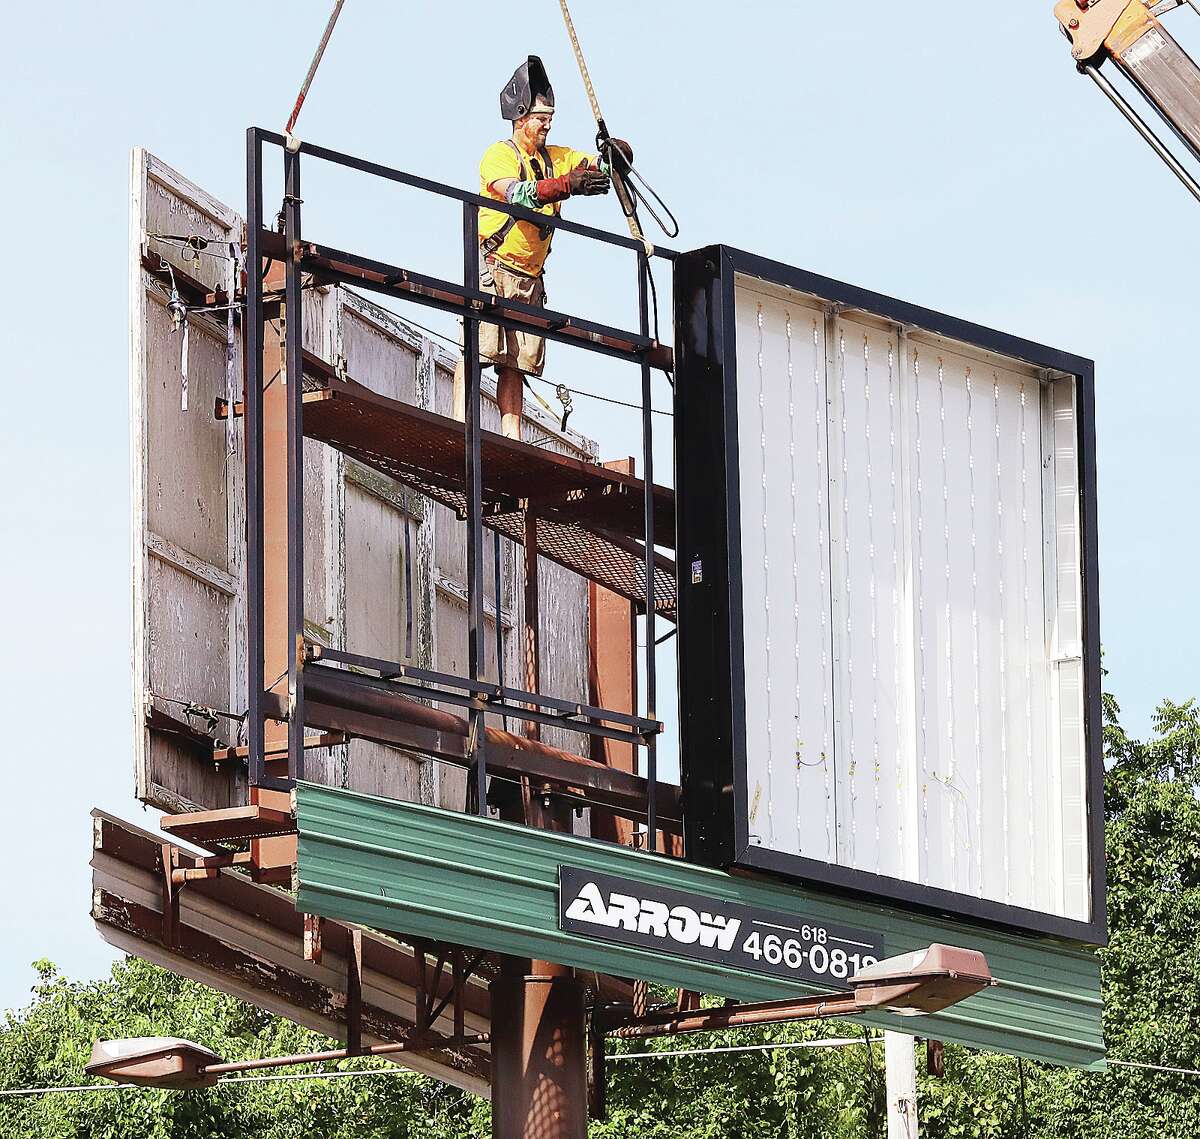 John Badman|The Telegraph It was out with the old and in with the new Thursday as workers from Arrow Signs and Outdoor Advertising were fitting a traditional billboard with modern LED lights in the 100 block of Alton Square Mall Drive in Alton.